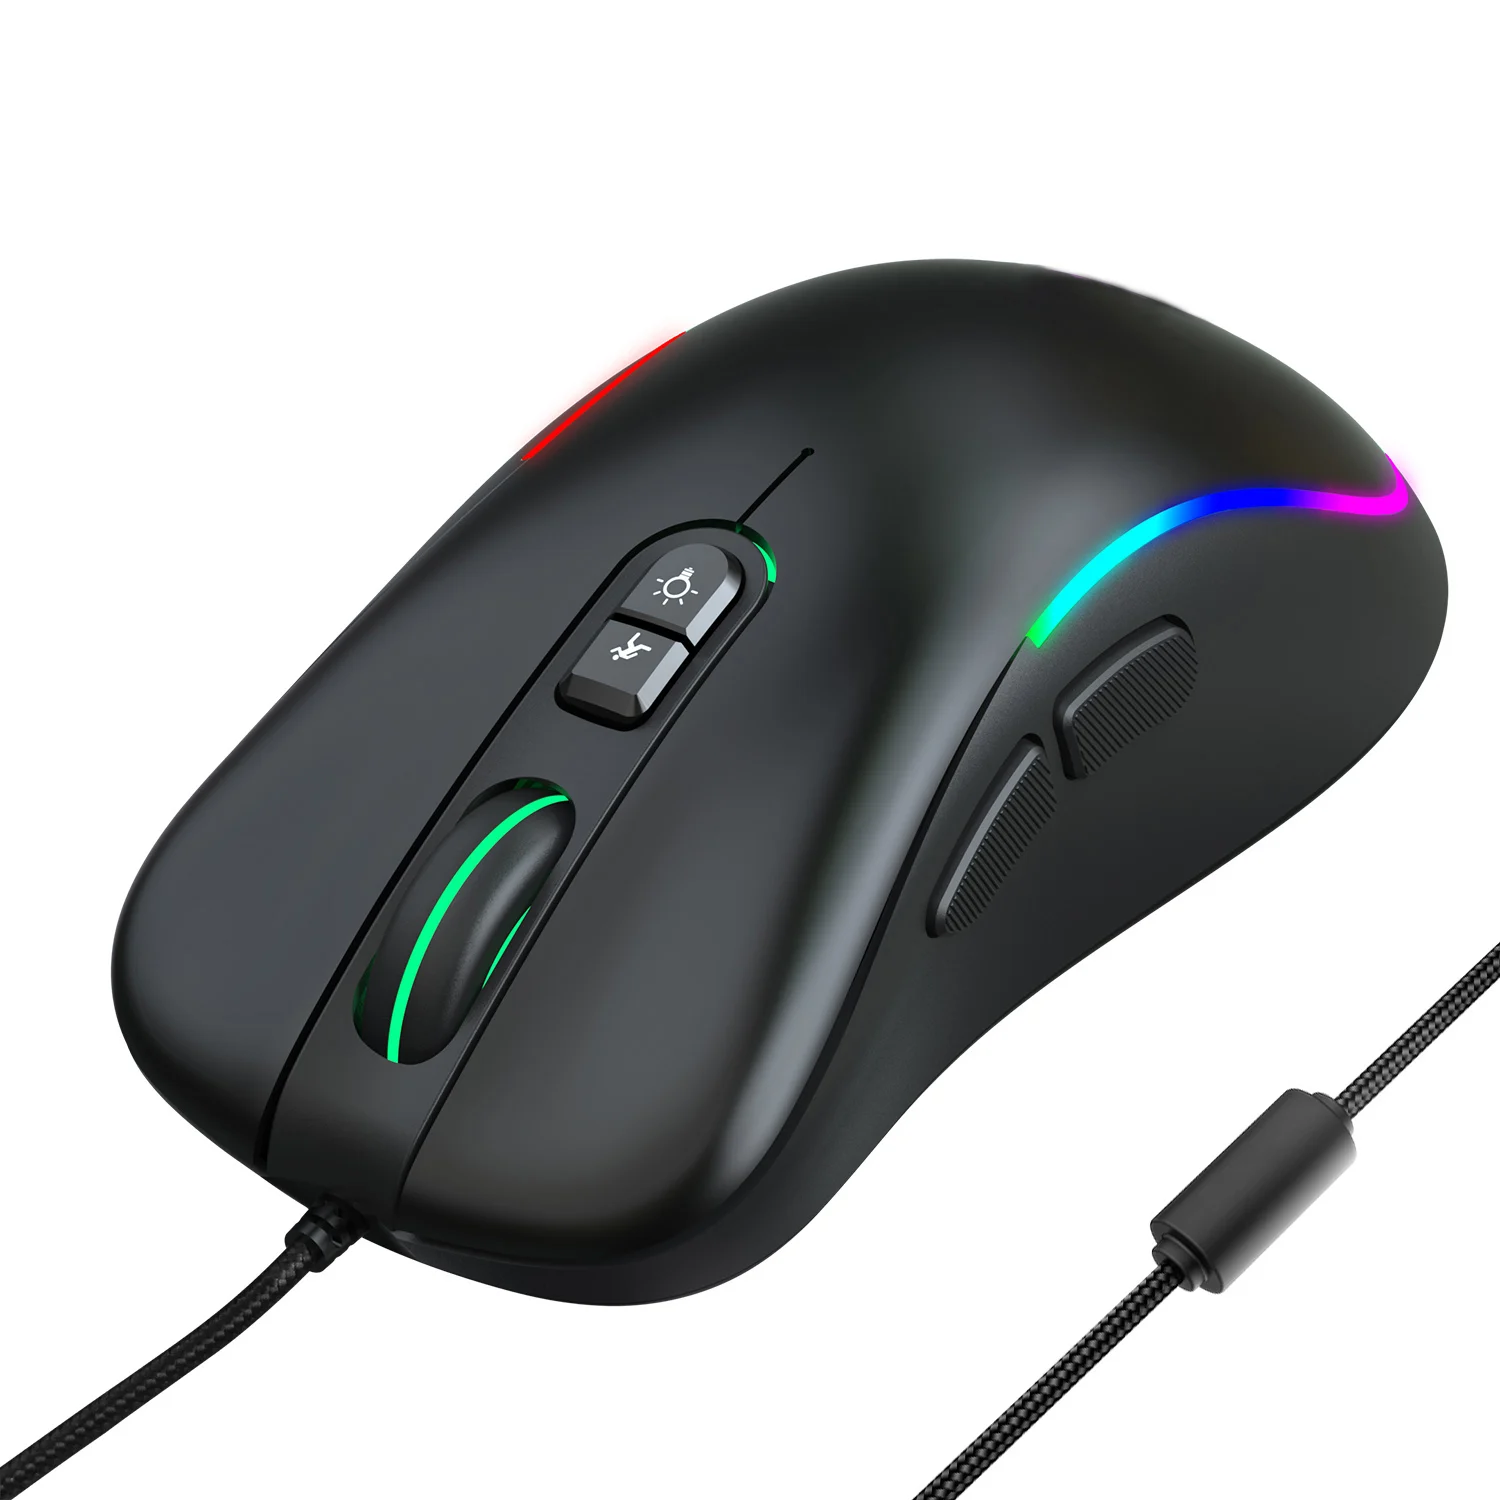 

J300 Wired Gaming Mouse with RGB Optical Usb Light Adjustable DPI 1000/1600/2400/3200/4800/6400 Both Hands CN;GUA Desktop,laptop